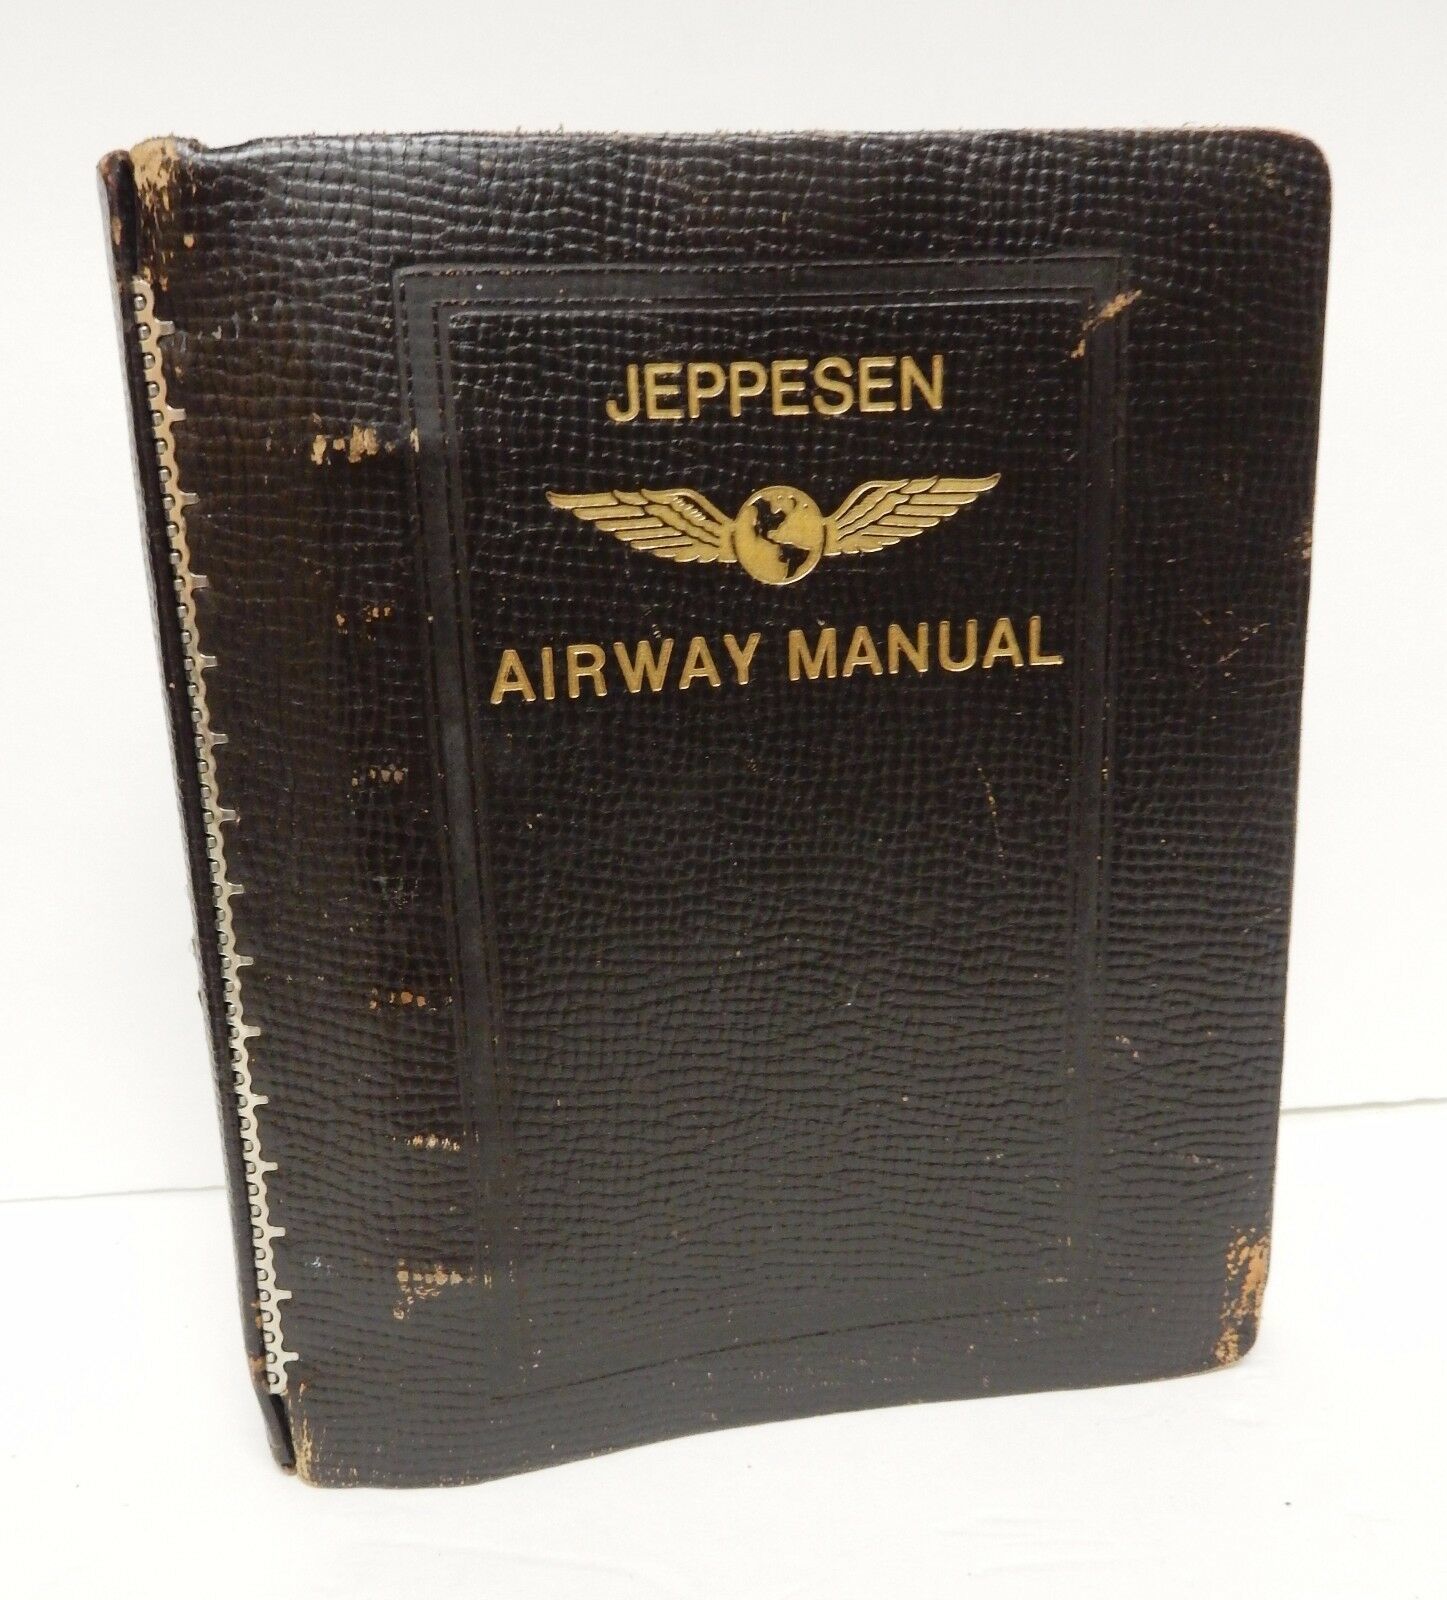 JEPPESEN AIRWAY MANUAL BINDER LEATHER VINTAGE - Other